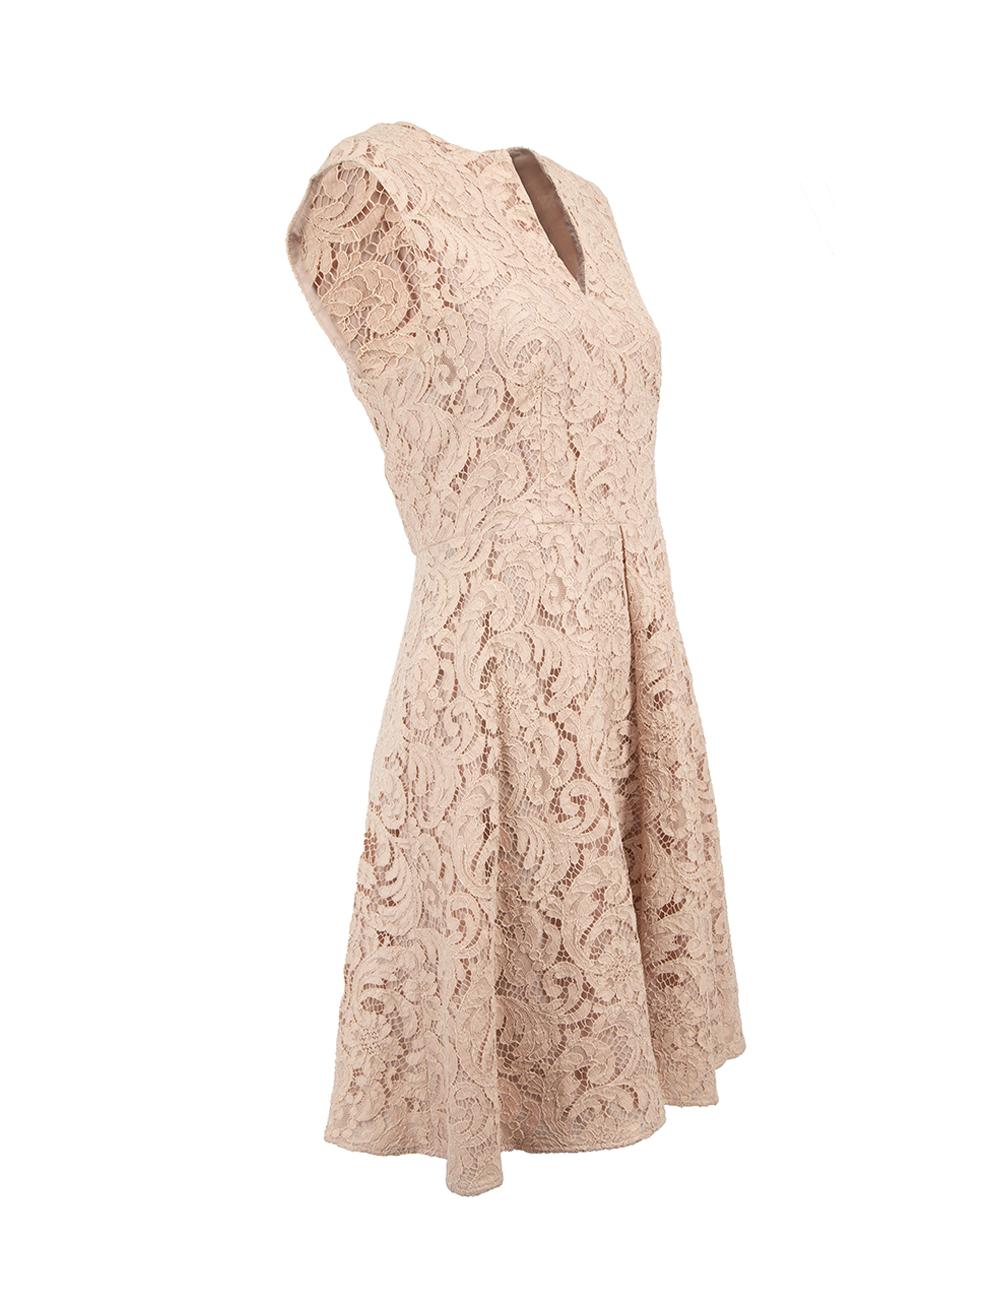 CONDITION is Very good. Hardly any visible wear to dress is evident on this used Burberry designer resale item.



Details


Pink

Lace

Mini dress

V neckline

Back zip closure





Made in Poland



Composition

71% Cotton, 19% Viscose and 10%